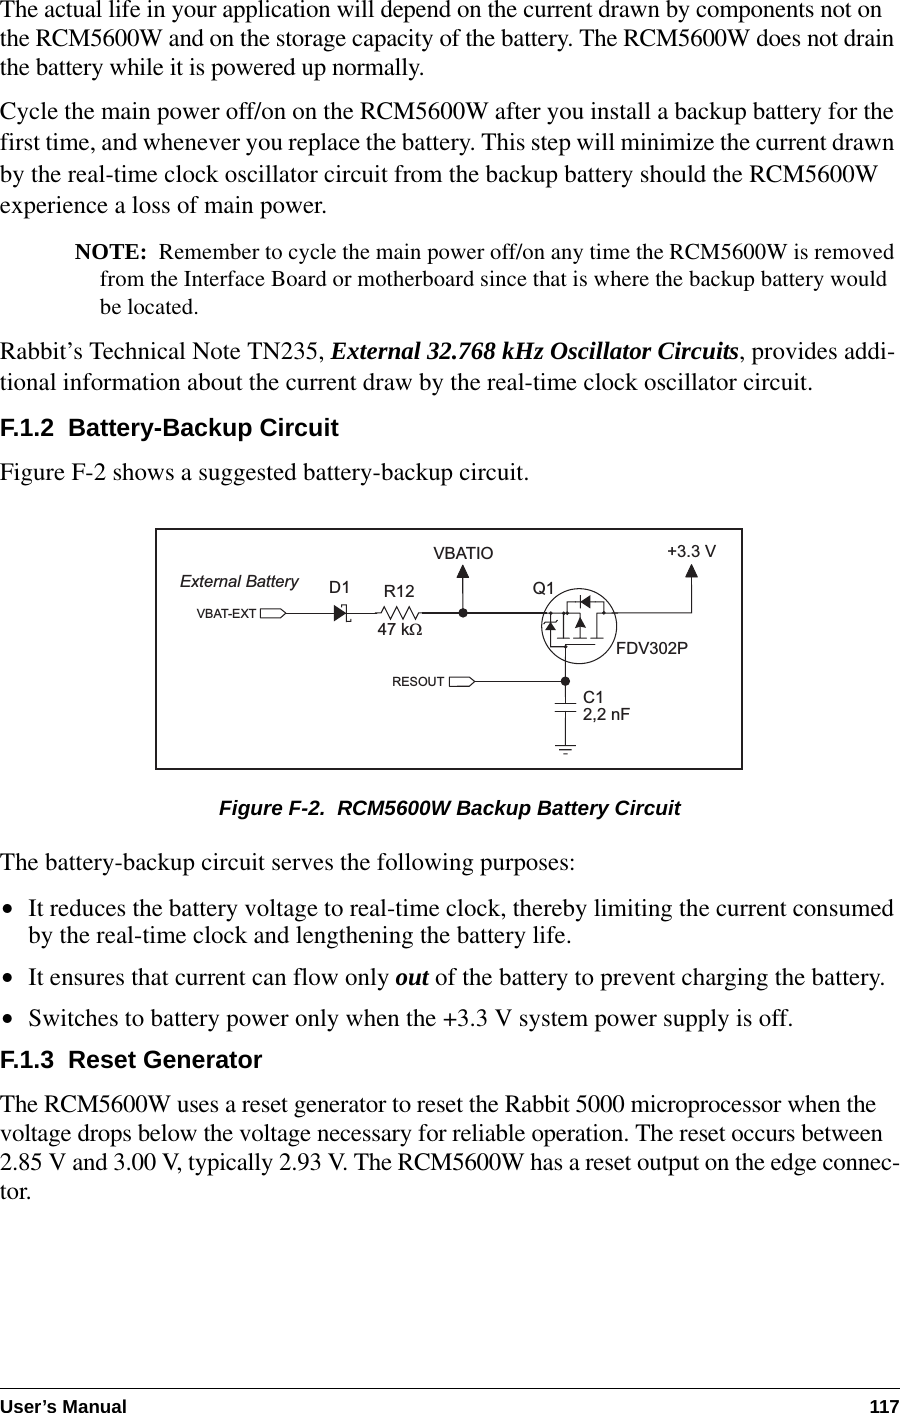 User’s Manual 117The actual life in your application will depend on the current drawn by components not on the RCM5600W and on the storage capacity of the battery. The RCM5600W does not drain the battery while it is powered up normally.Cycle the main power off/on on the RCM5600W after you install a backup battery for the first time, and whenever you replace the battery. This step will minimize the current drawn by the real-time clock oscillator circuit from the backup battery should the RCM5600W experience a loss of main power.NOTE: Remember to cycle the main power off/on any time the RCM5600W is removed from the Interface Board or motherboard since that is where the backup battery would be located.Rabbit’s Technical Note TN235, External 32.768 kHz Oscillator Circuits, provides addi-tional information about the current draw by the real-time clock oscillator circuit.F.1.2  Battery-Backup CircuitFigure F-2 shows a suggested battery-backup circuit.Figure F-2.  RCM5600W Backup Battery CircuitThe battery-backup circuit serves the following purposes:•It reduces the battery voltage to real-time clock, thereby limiting the current consumed by the real-time clock and lengthening the battery life.•It ensures that current can flow only out of the battery to prevent charging the battery.•Switches to battery power only when the +3.3 V system power supply is off.F.1.3  Reset GeneratorThe RCM5600W uses a reset generator to reset the Rabbit 5000 microprocessor when the voltage drops below the voltage necessary for reliable operation. The reset occurs between 2.85 V and 3.00 V, typically 2.93 V. The RCM5600W has a reset output on the edge connec-tor.VBATIO47 kWR12VBAT-EXTExternal Battery+3.3 VD1C12,2 nFQ1FDV302PRESOUT